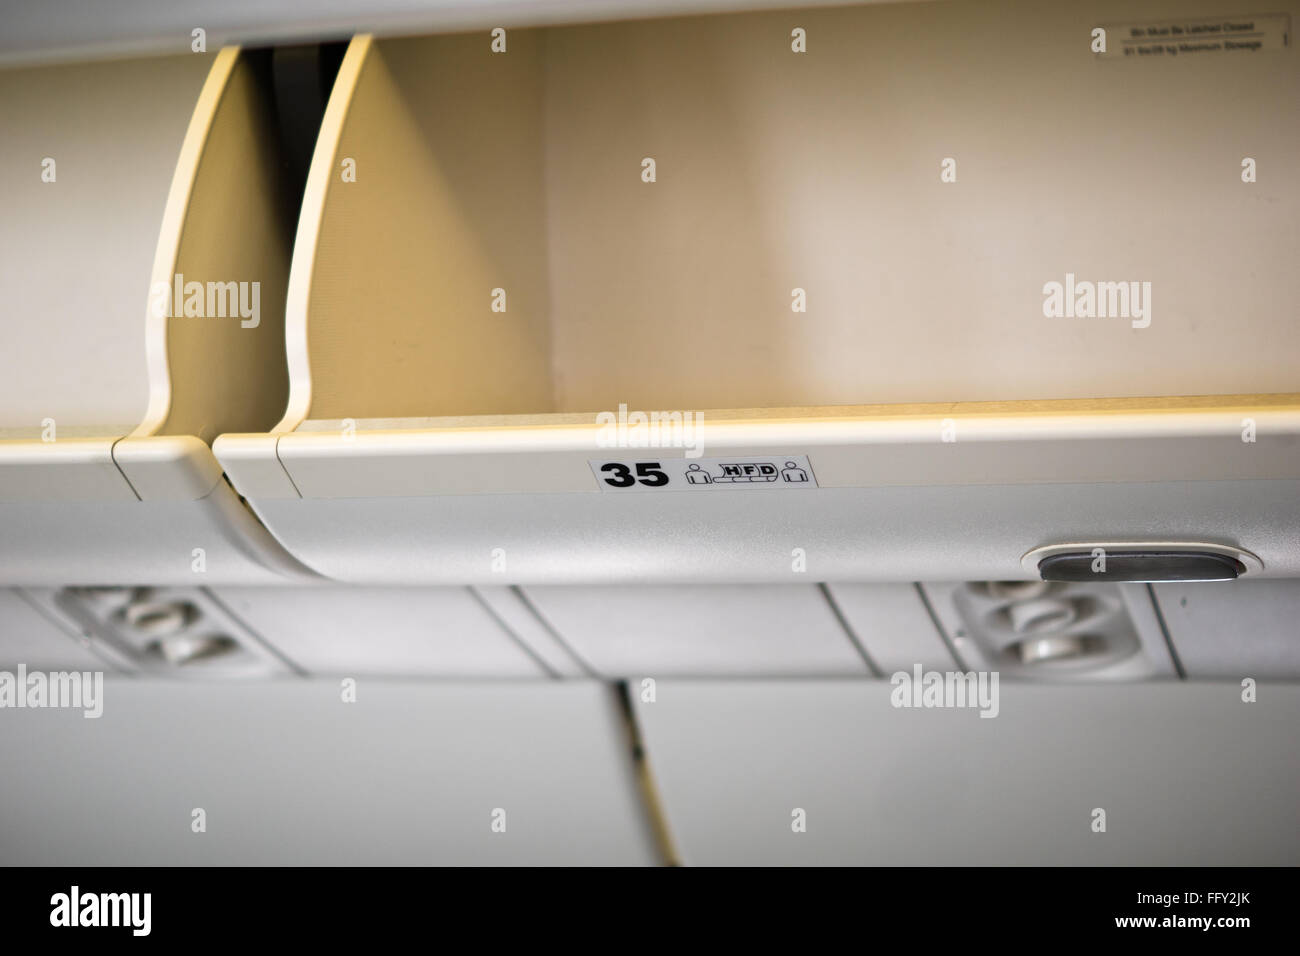 Overhead luggage compartment of airplane Stock Photo